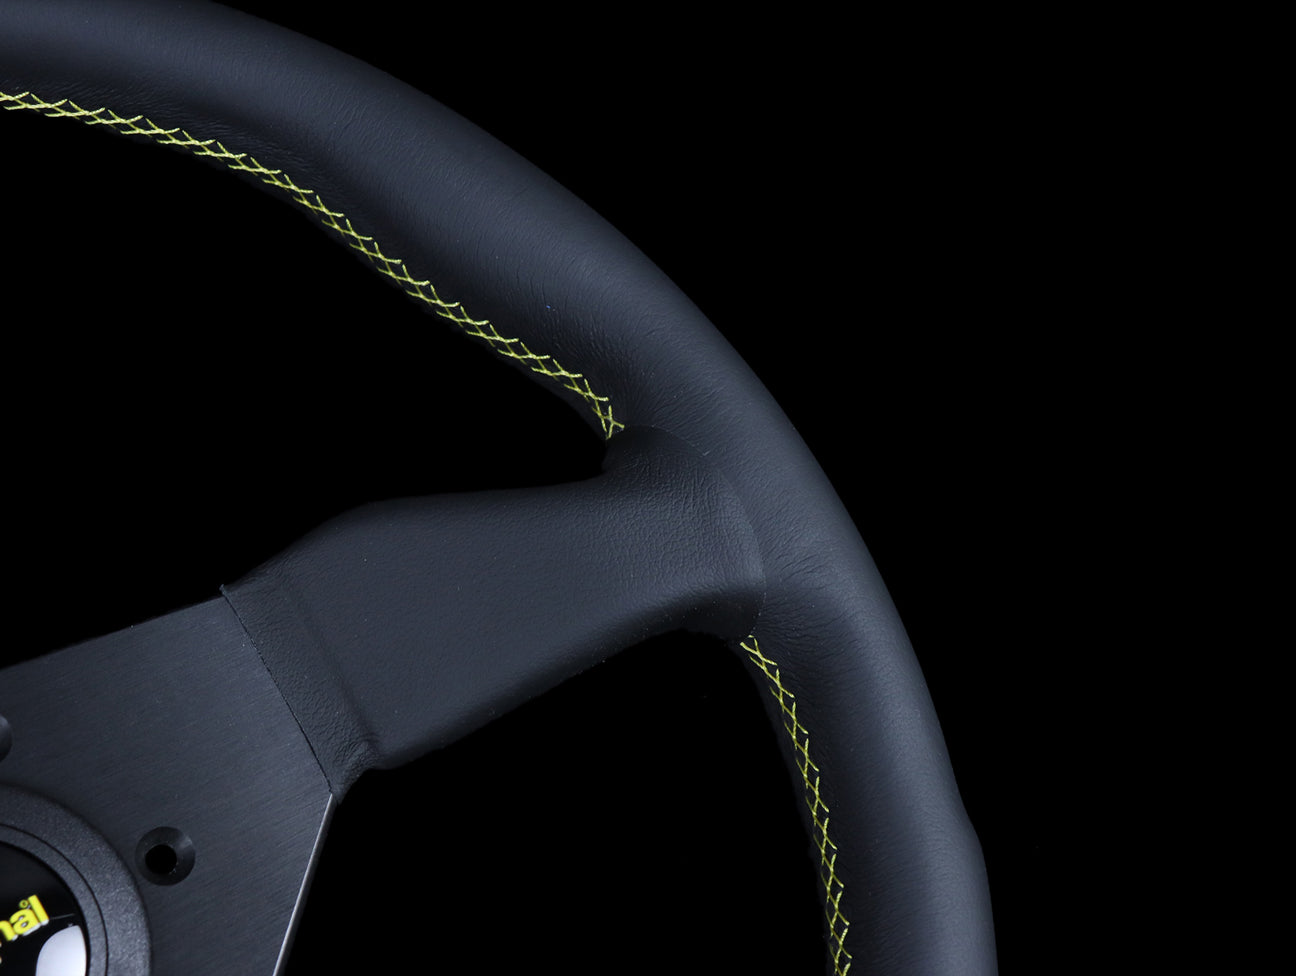 Personal Grinta 330mm Steering Wheel - Black Leather / Yellow Stitch